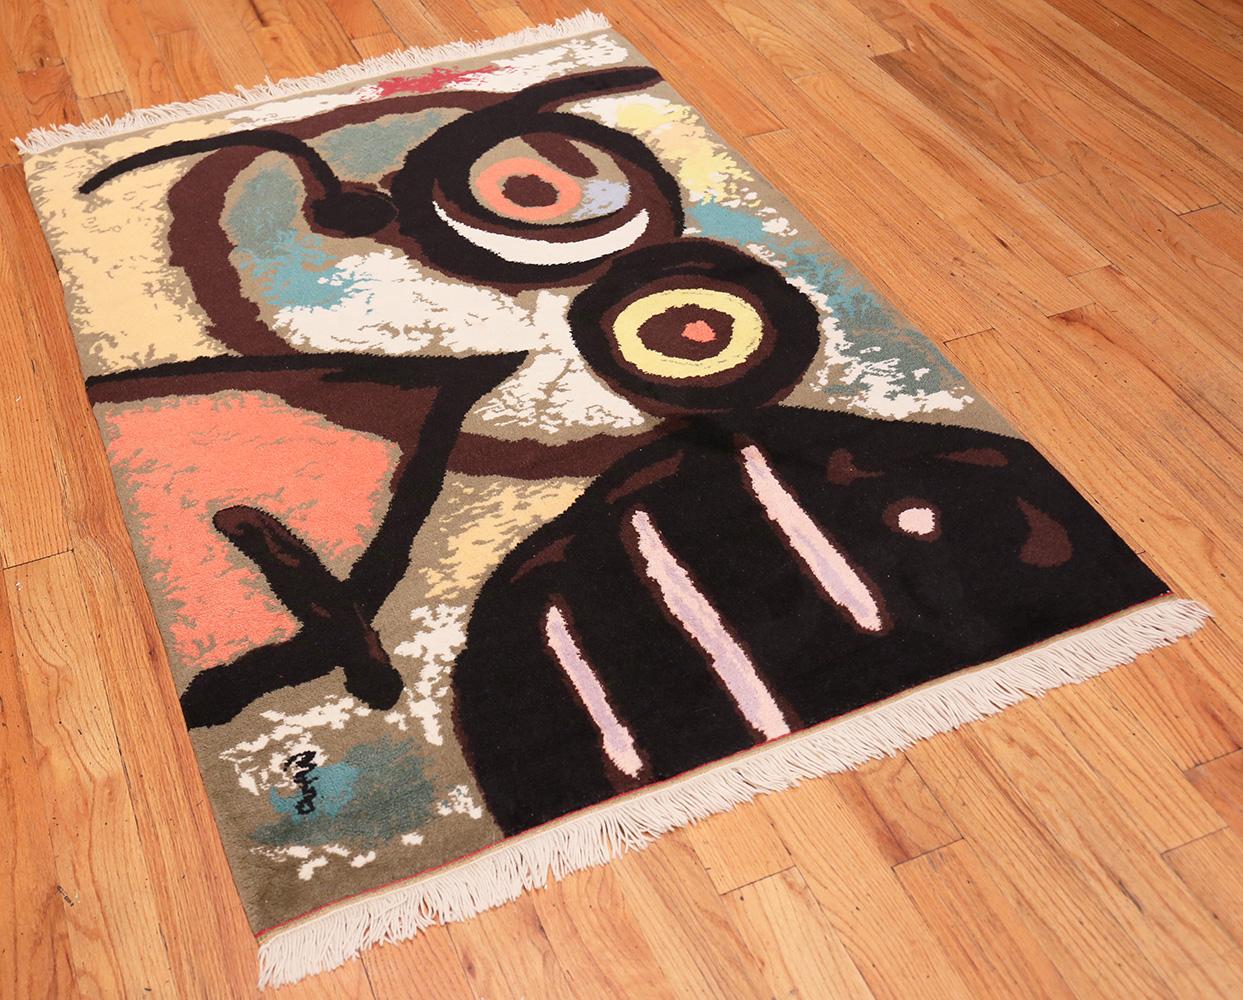 Hand-Knotted Vintage Art Rug Based On Joan Miro. Size: 4 ft 10 in x 3 ft 5 in